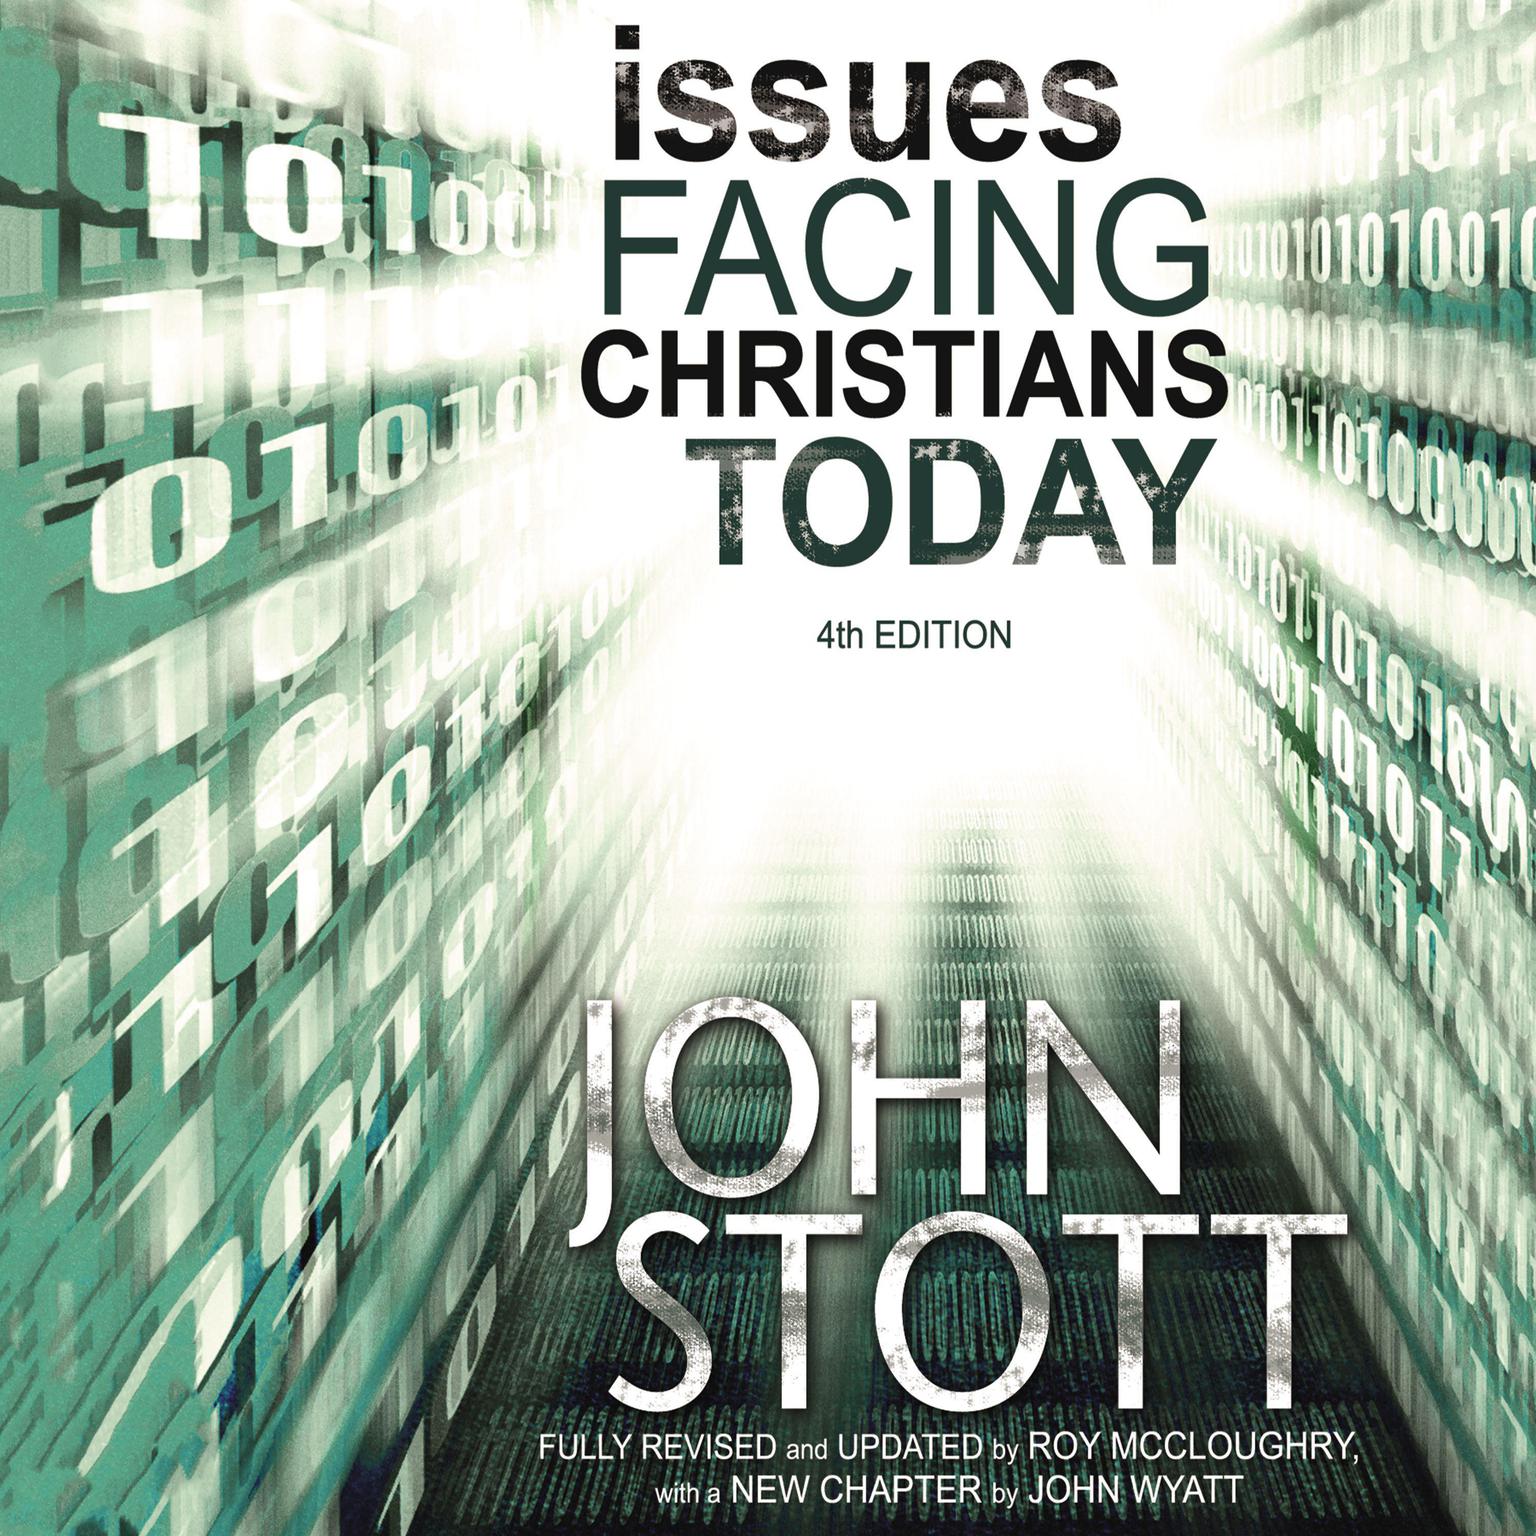 Issues Facing Christians Today: 4th Edition Audiobook, by John Stott